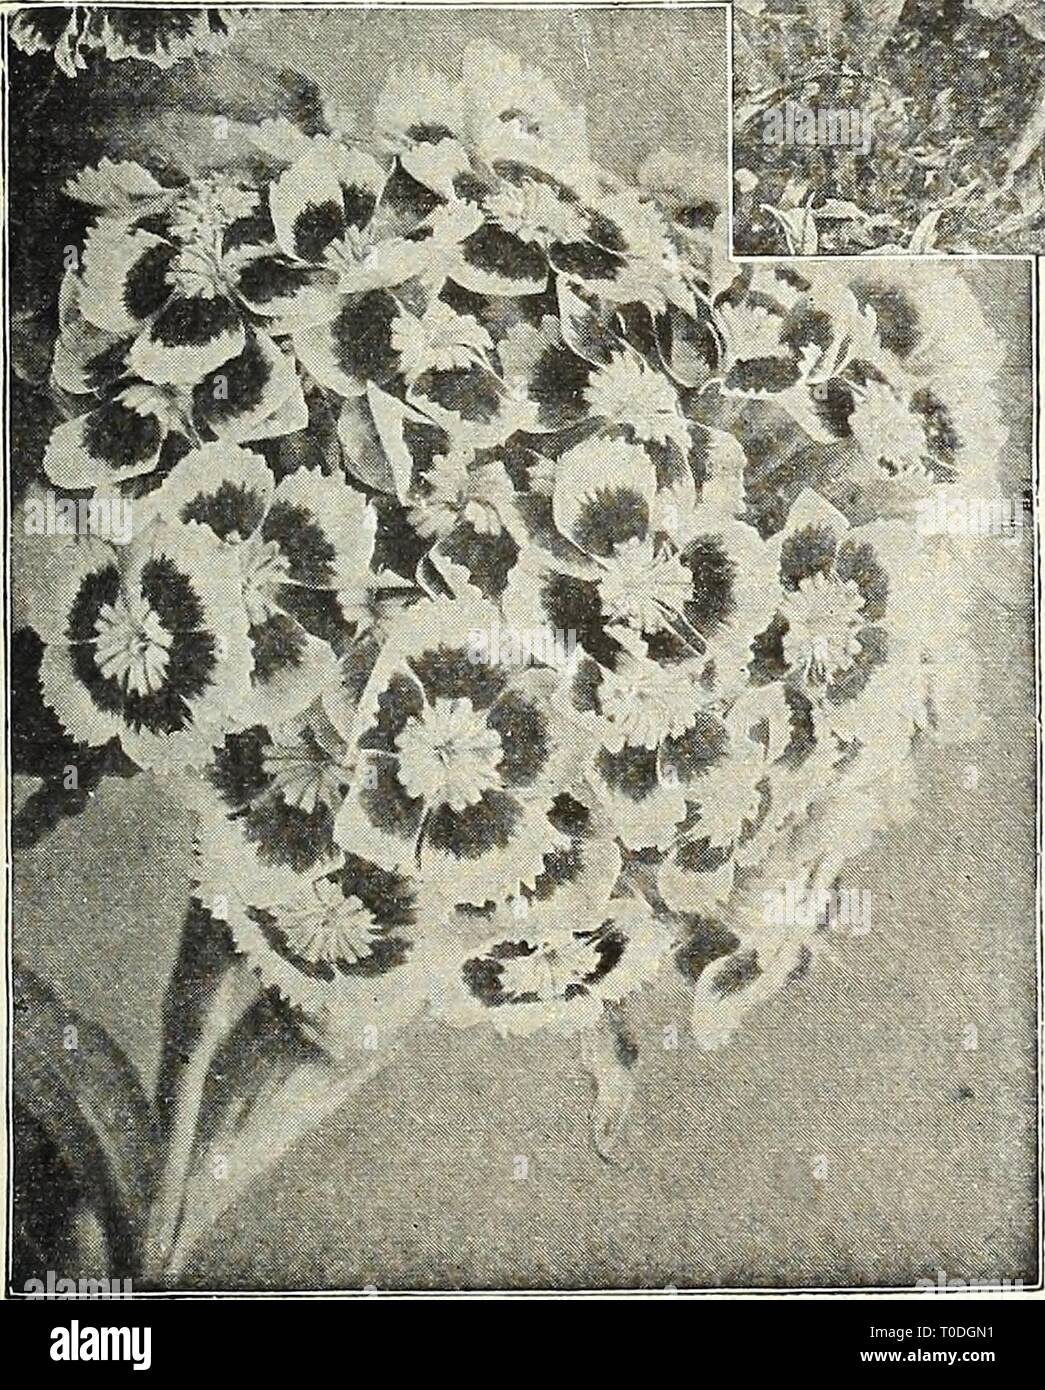 Dreer's garden book 1924 (1924) Dreer's garden book 1924 dreersgardenbook1924henr Year: 1924  /flEHiyAJREEPu^ HARDY PERENNIAL PIANTS &gt;HiLaiEiiPmik 195 SISYRINCHIUM (Satin Lily or Blue-eyed Grass) Bermudianum. A pretty early spring and fall-flowering plant with blue flowers and grass-like foliage. 25 cts. each; $2.50 per doz. STACHYS (Woundwort) Betonica Grandiflora (Betony). Large flowers of purplish-rose; June and July; 15 inches. 25 cts. each; $2.50 per doz. STAT ICE (Great Sea Lavender) Latifolia. A most valuable plant either for the border or rockery with tufts of leathery leaves and i Stock Photo